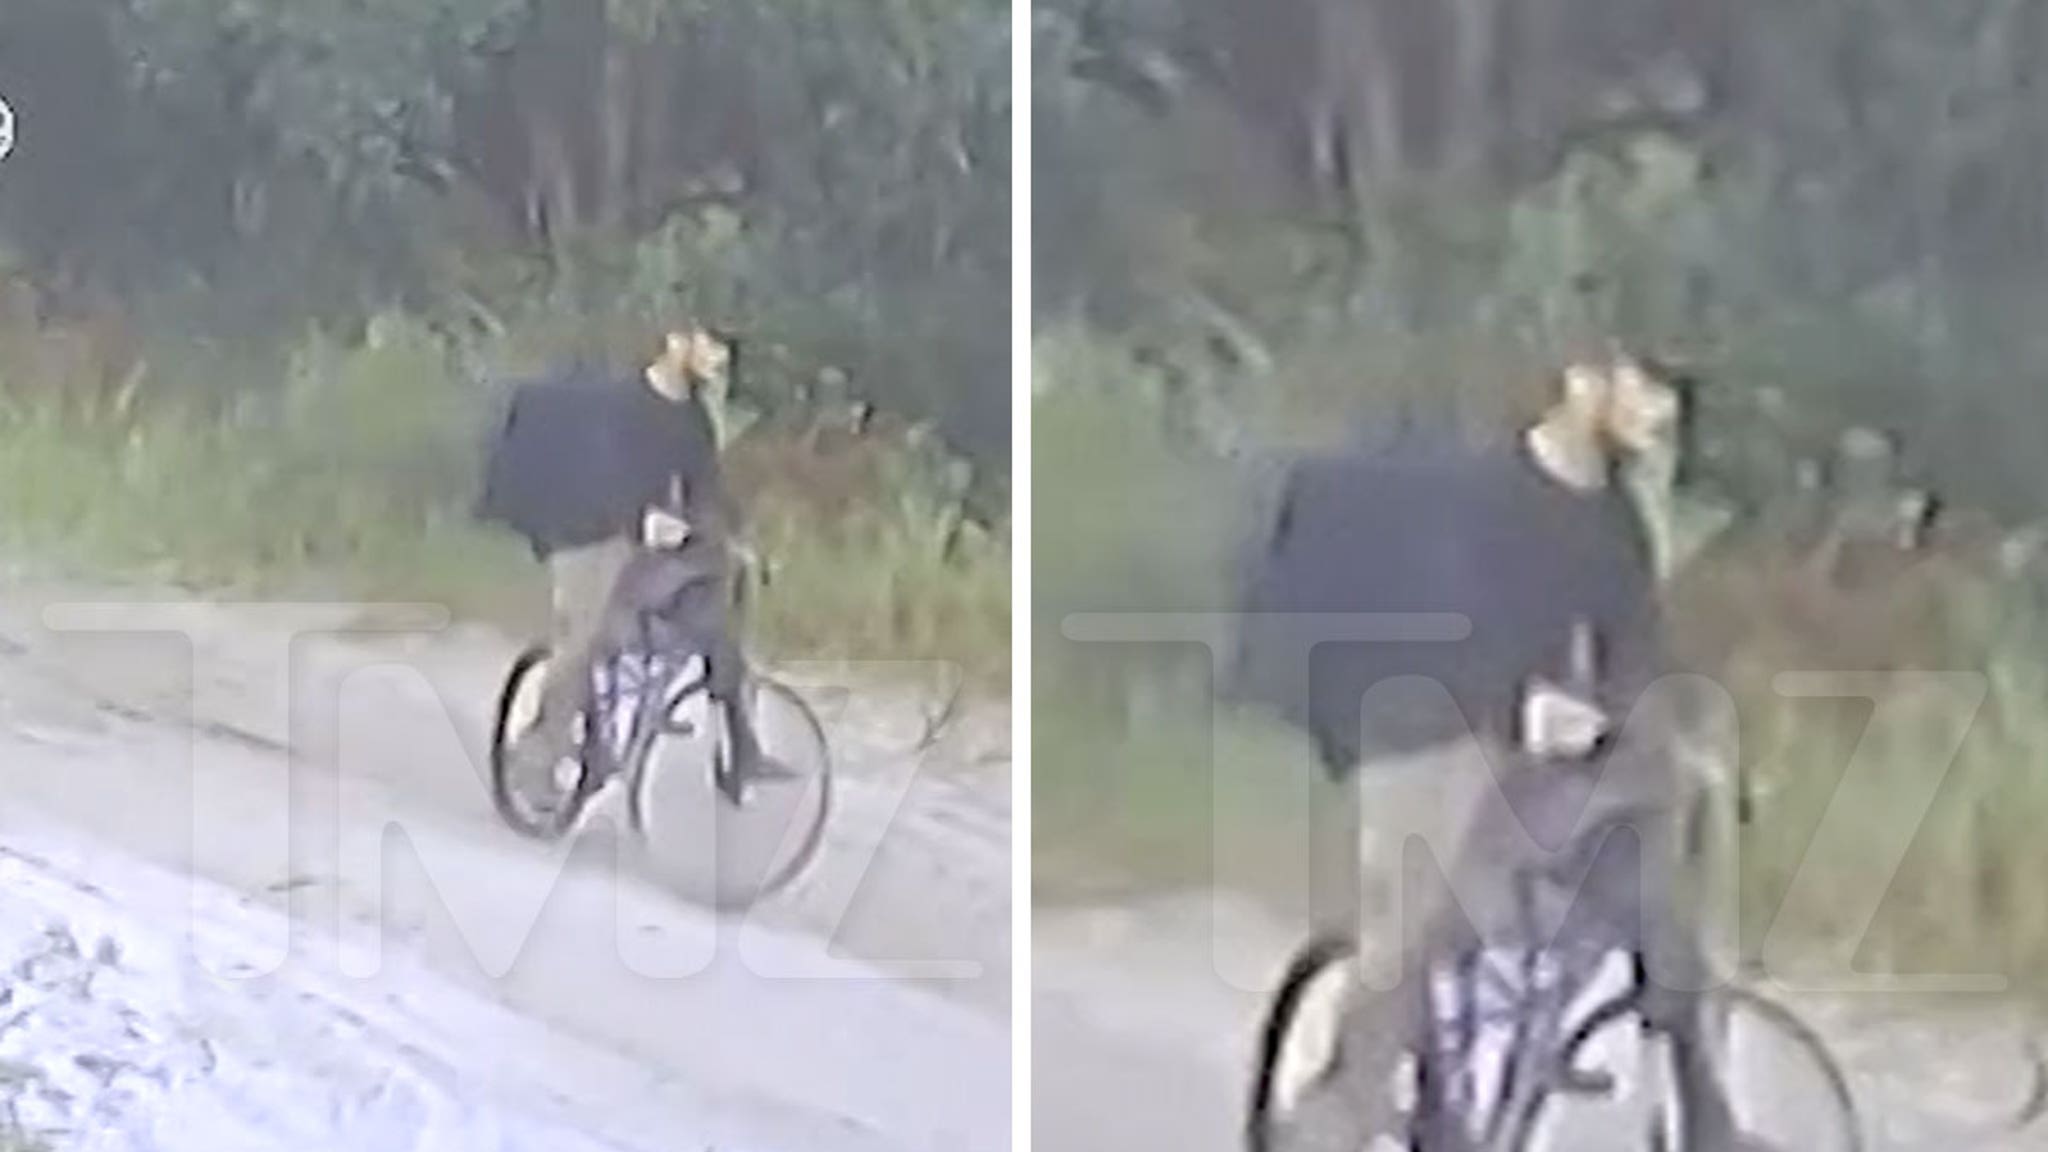 Possible Brian Laundrie Sighting in Florida, Surveillance Video Shows